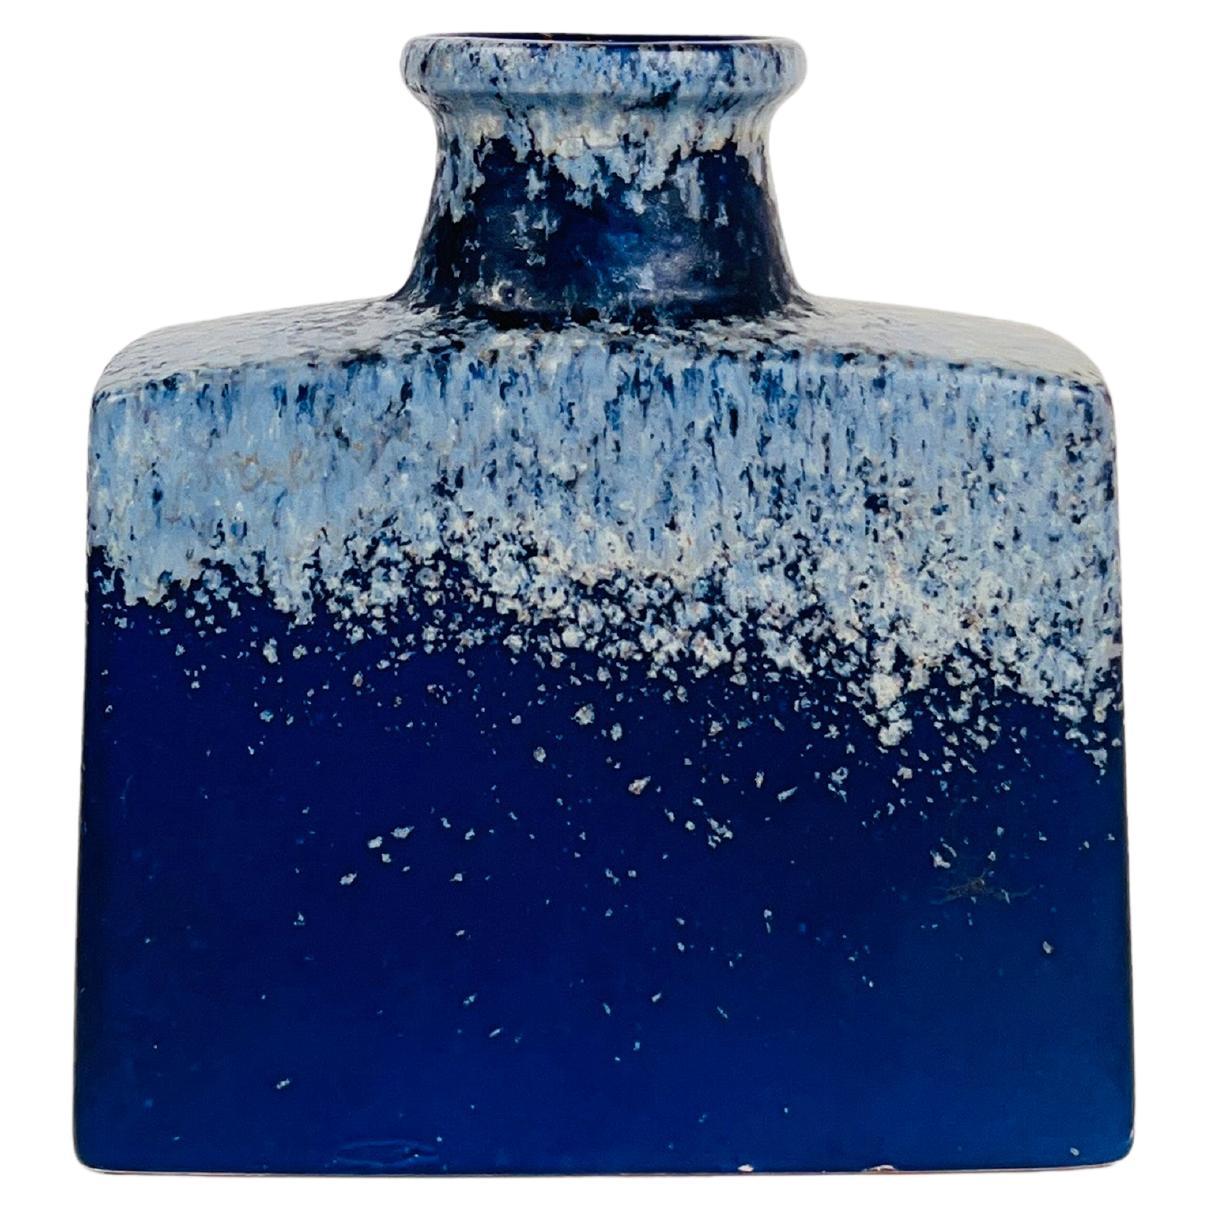 Fat Lava Short Vase in Smooth Klein Blue and White Texture Glaze, Germany 1960 For Sale